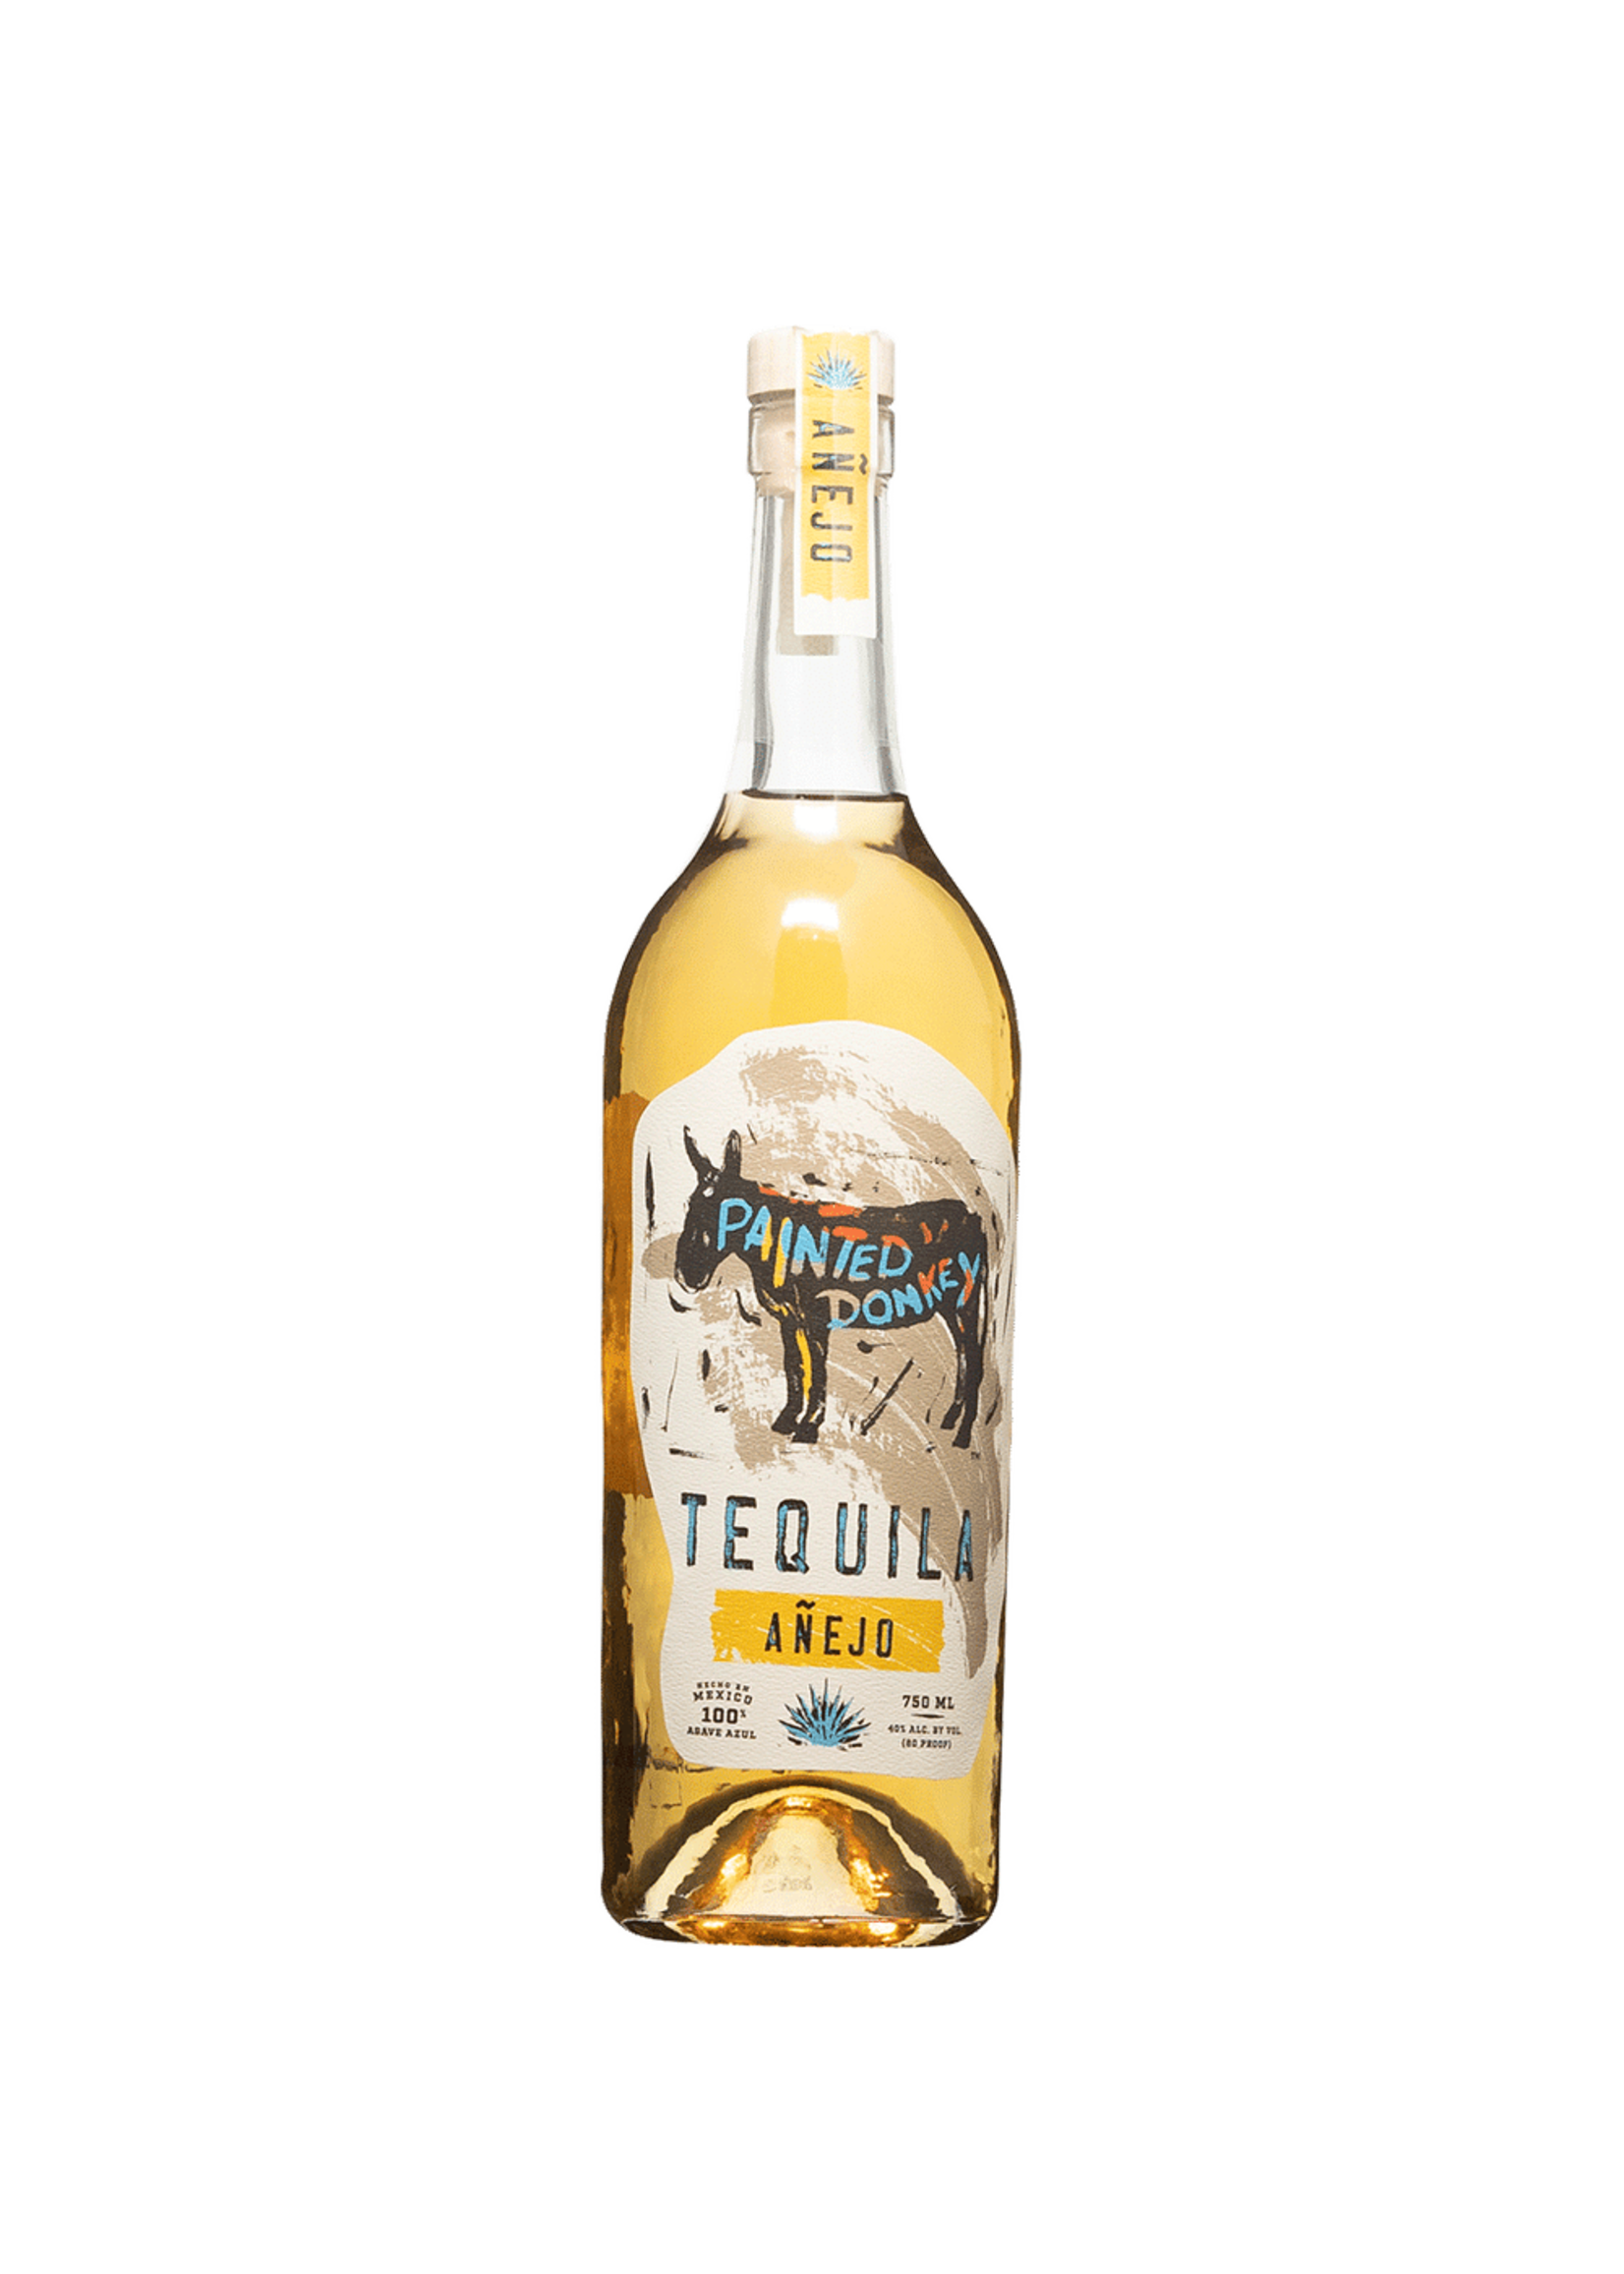 Painted Donkey Tequila Painted Donkey Anejo Tequila 80Proof 750ml